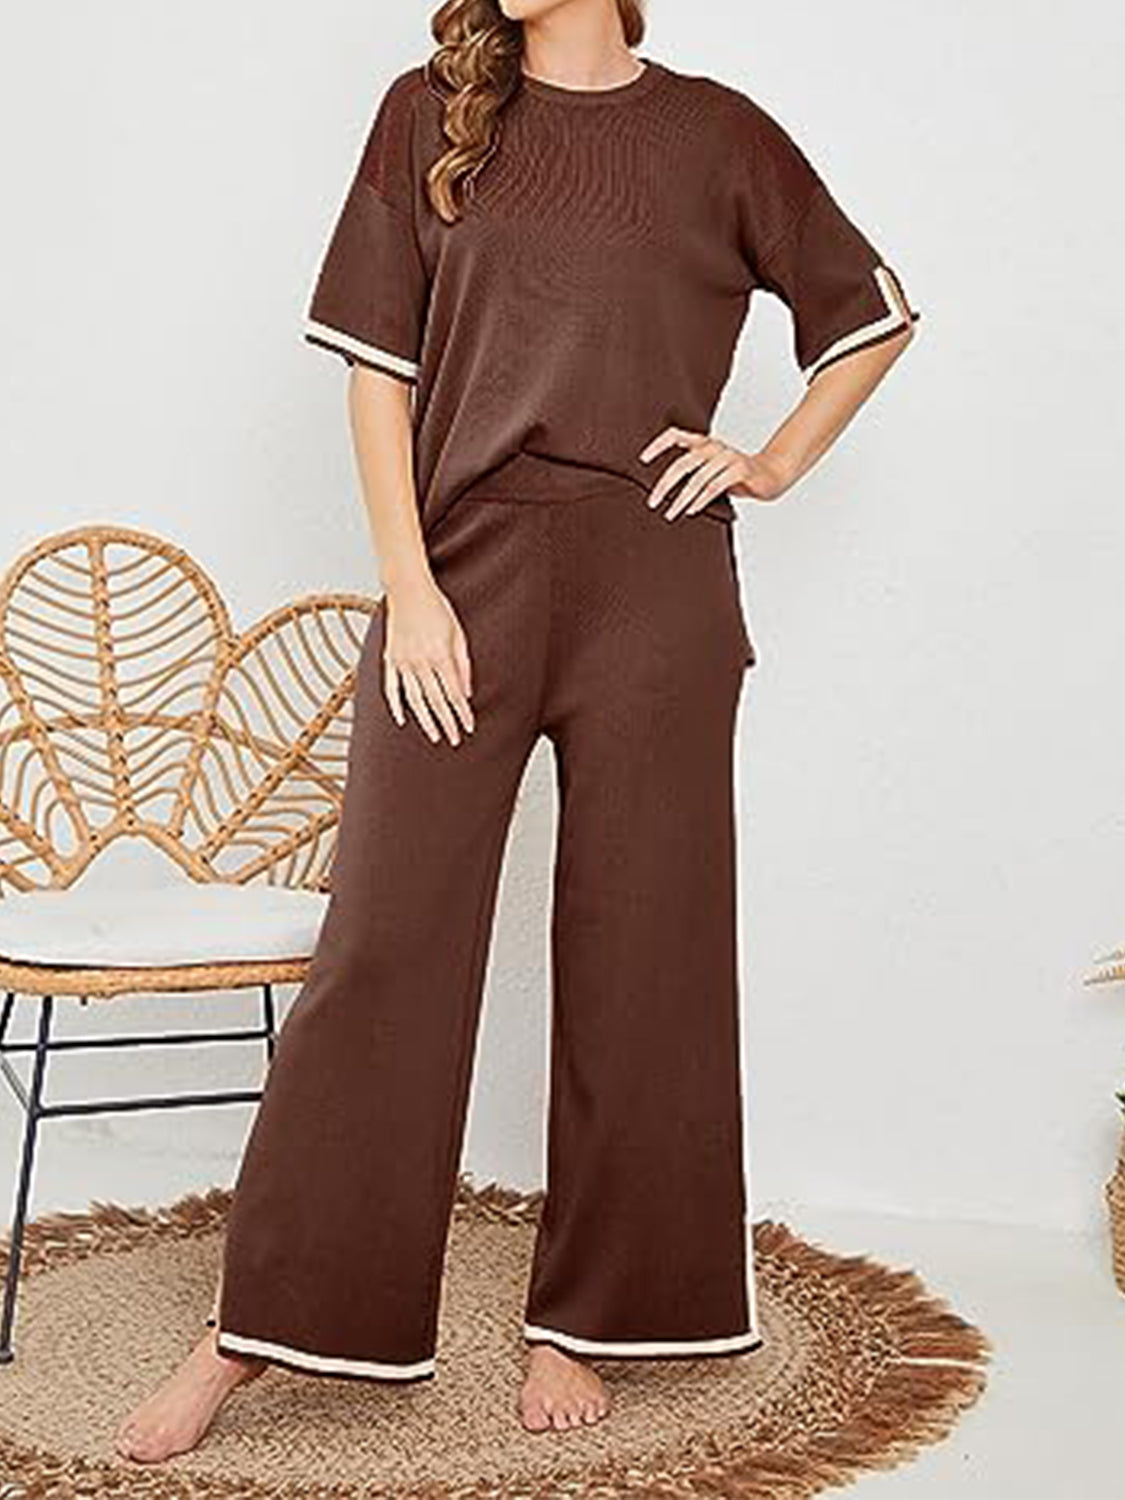 Saddle Brown Contrast High-Low Sweater and Knit Pants Set Sentient Beauty Fashions Apparel &amp; Accessories